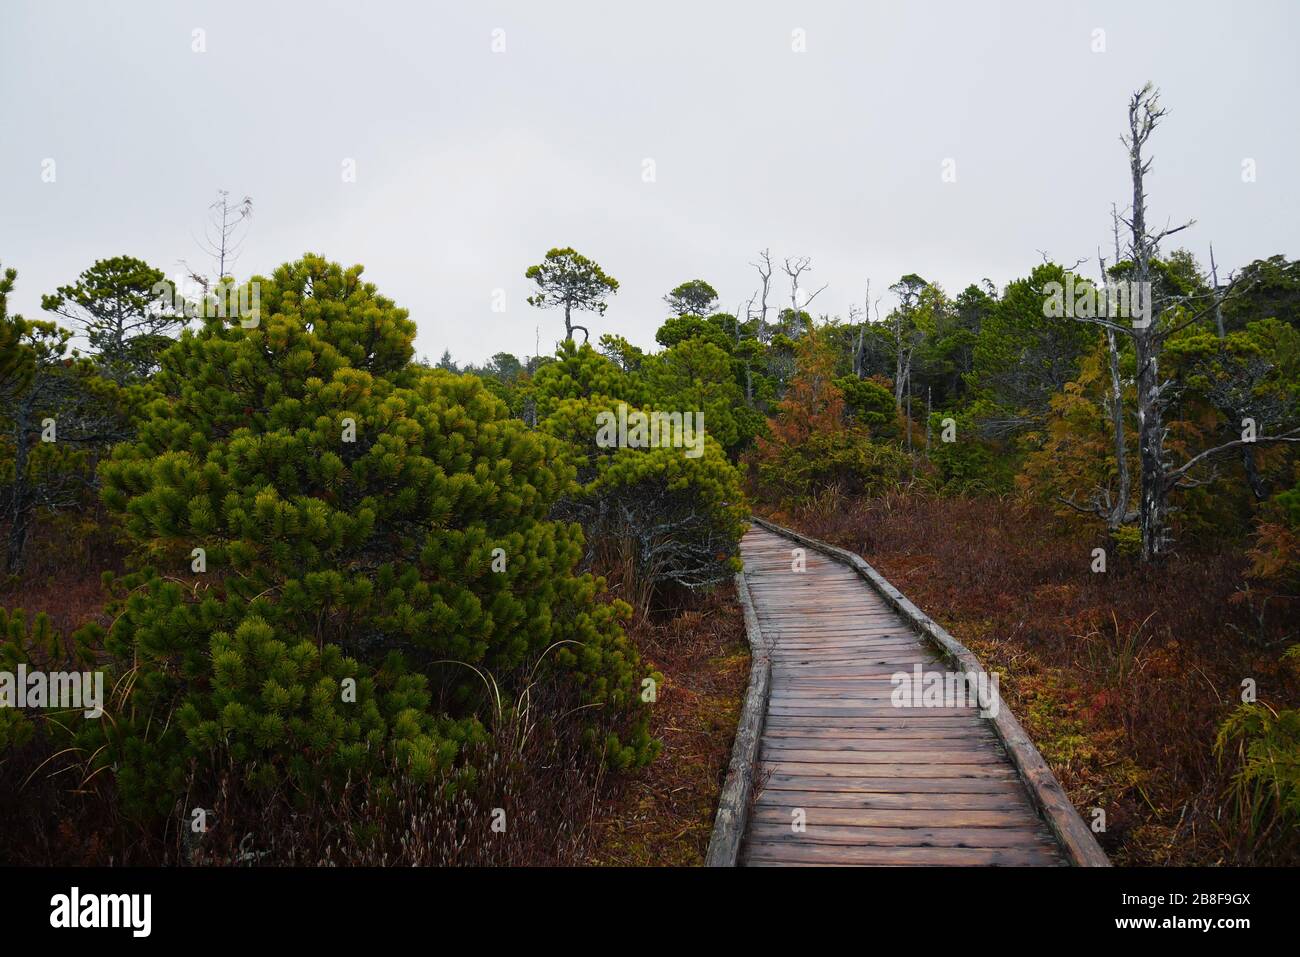 Boardwalk through bog with bright green stunted trees and orange colored moss Stock Photo